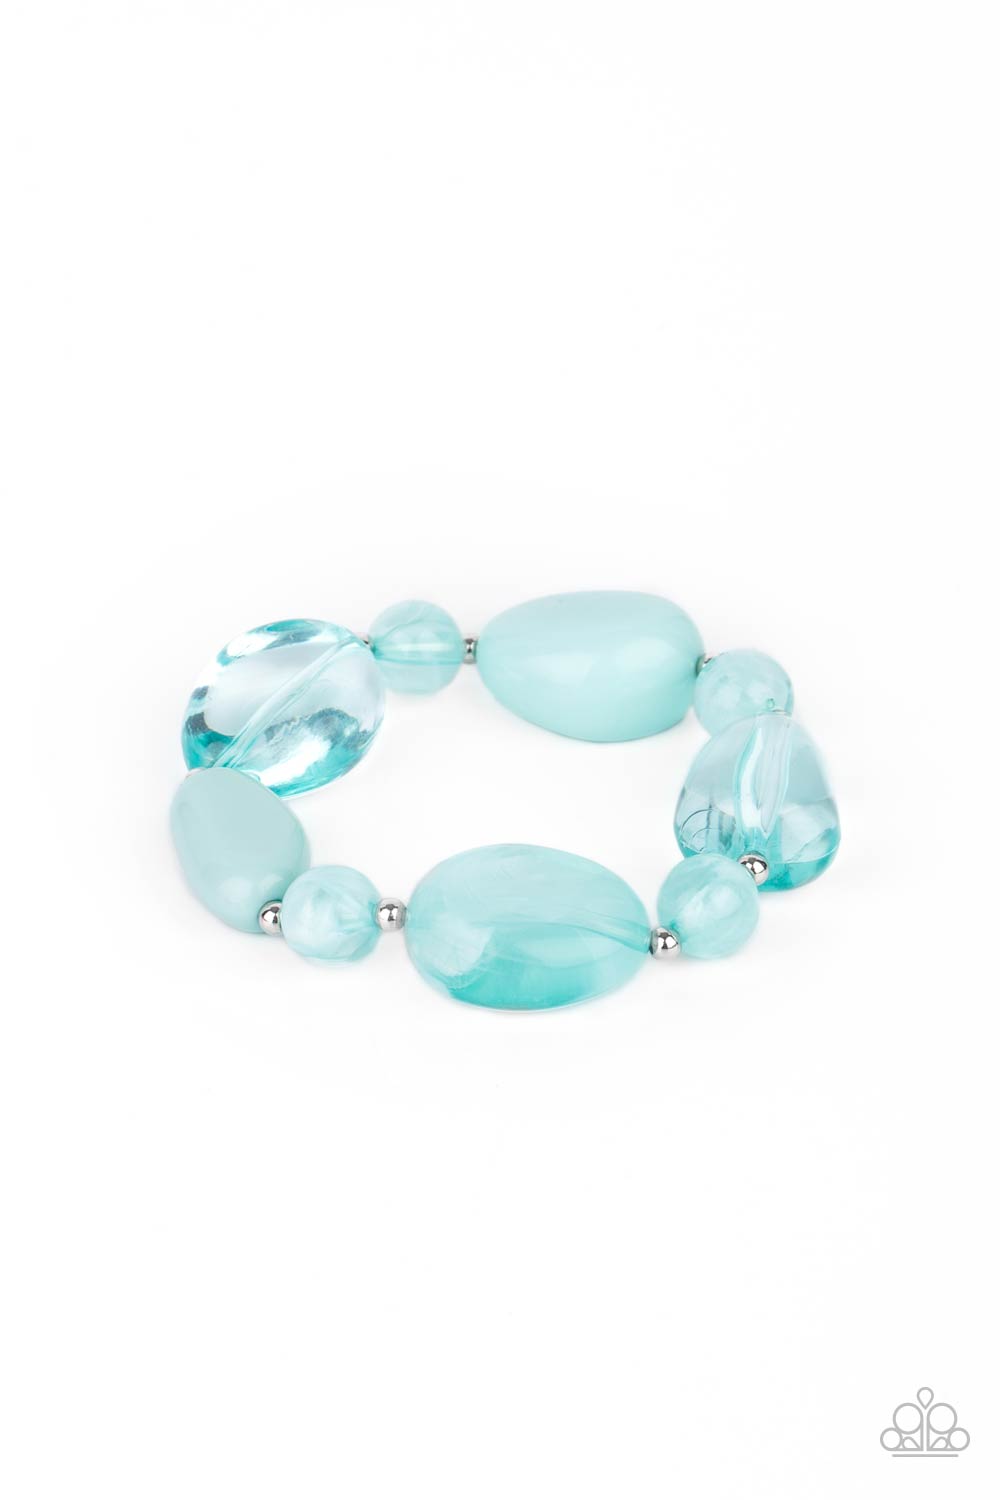 A230 - Staycation Stunner, Paparazzi Blue Necklace by Paparazzi Accessories on Fancy5Fashion.com